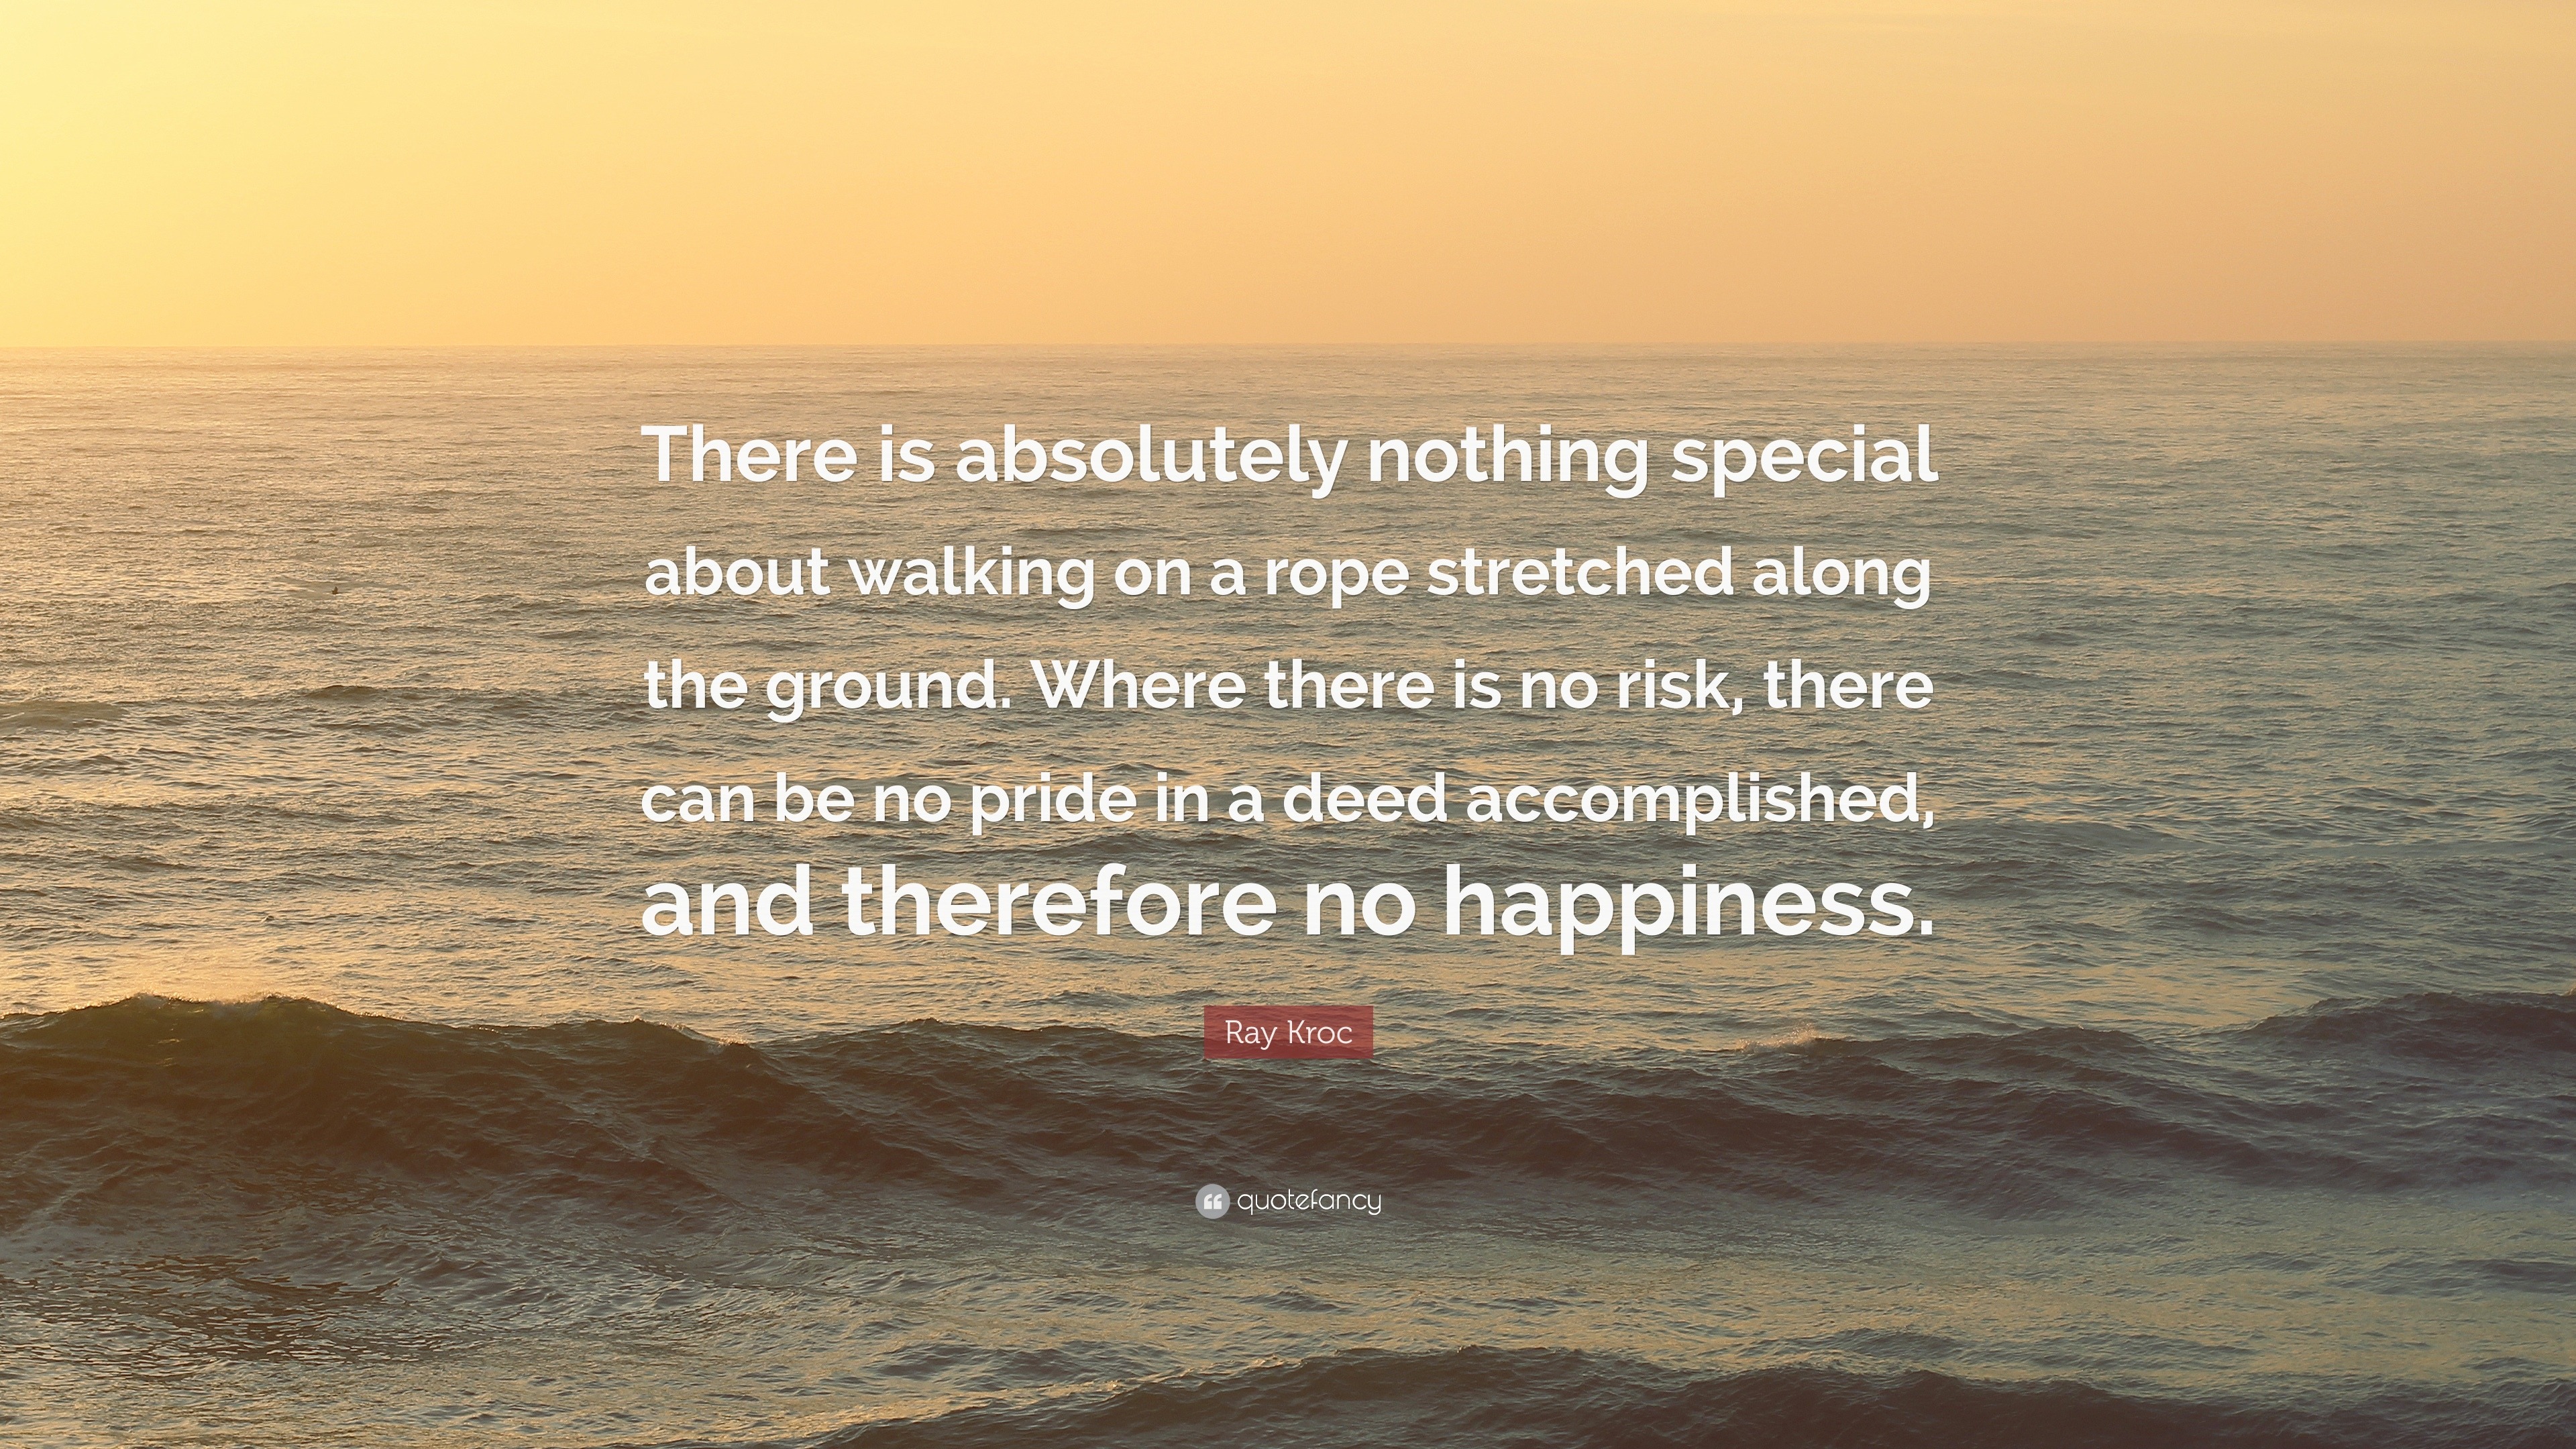 Ray Kroc Quote: “There is absolutely nothing special about walking on a ...